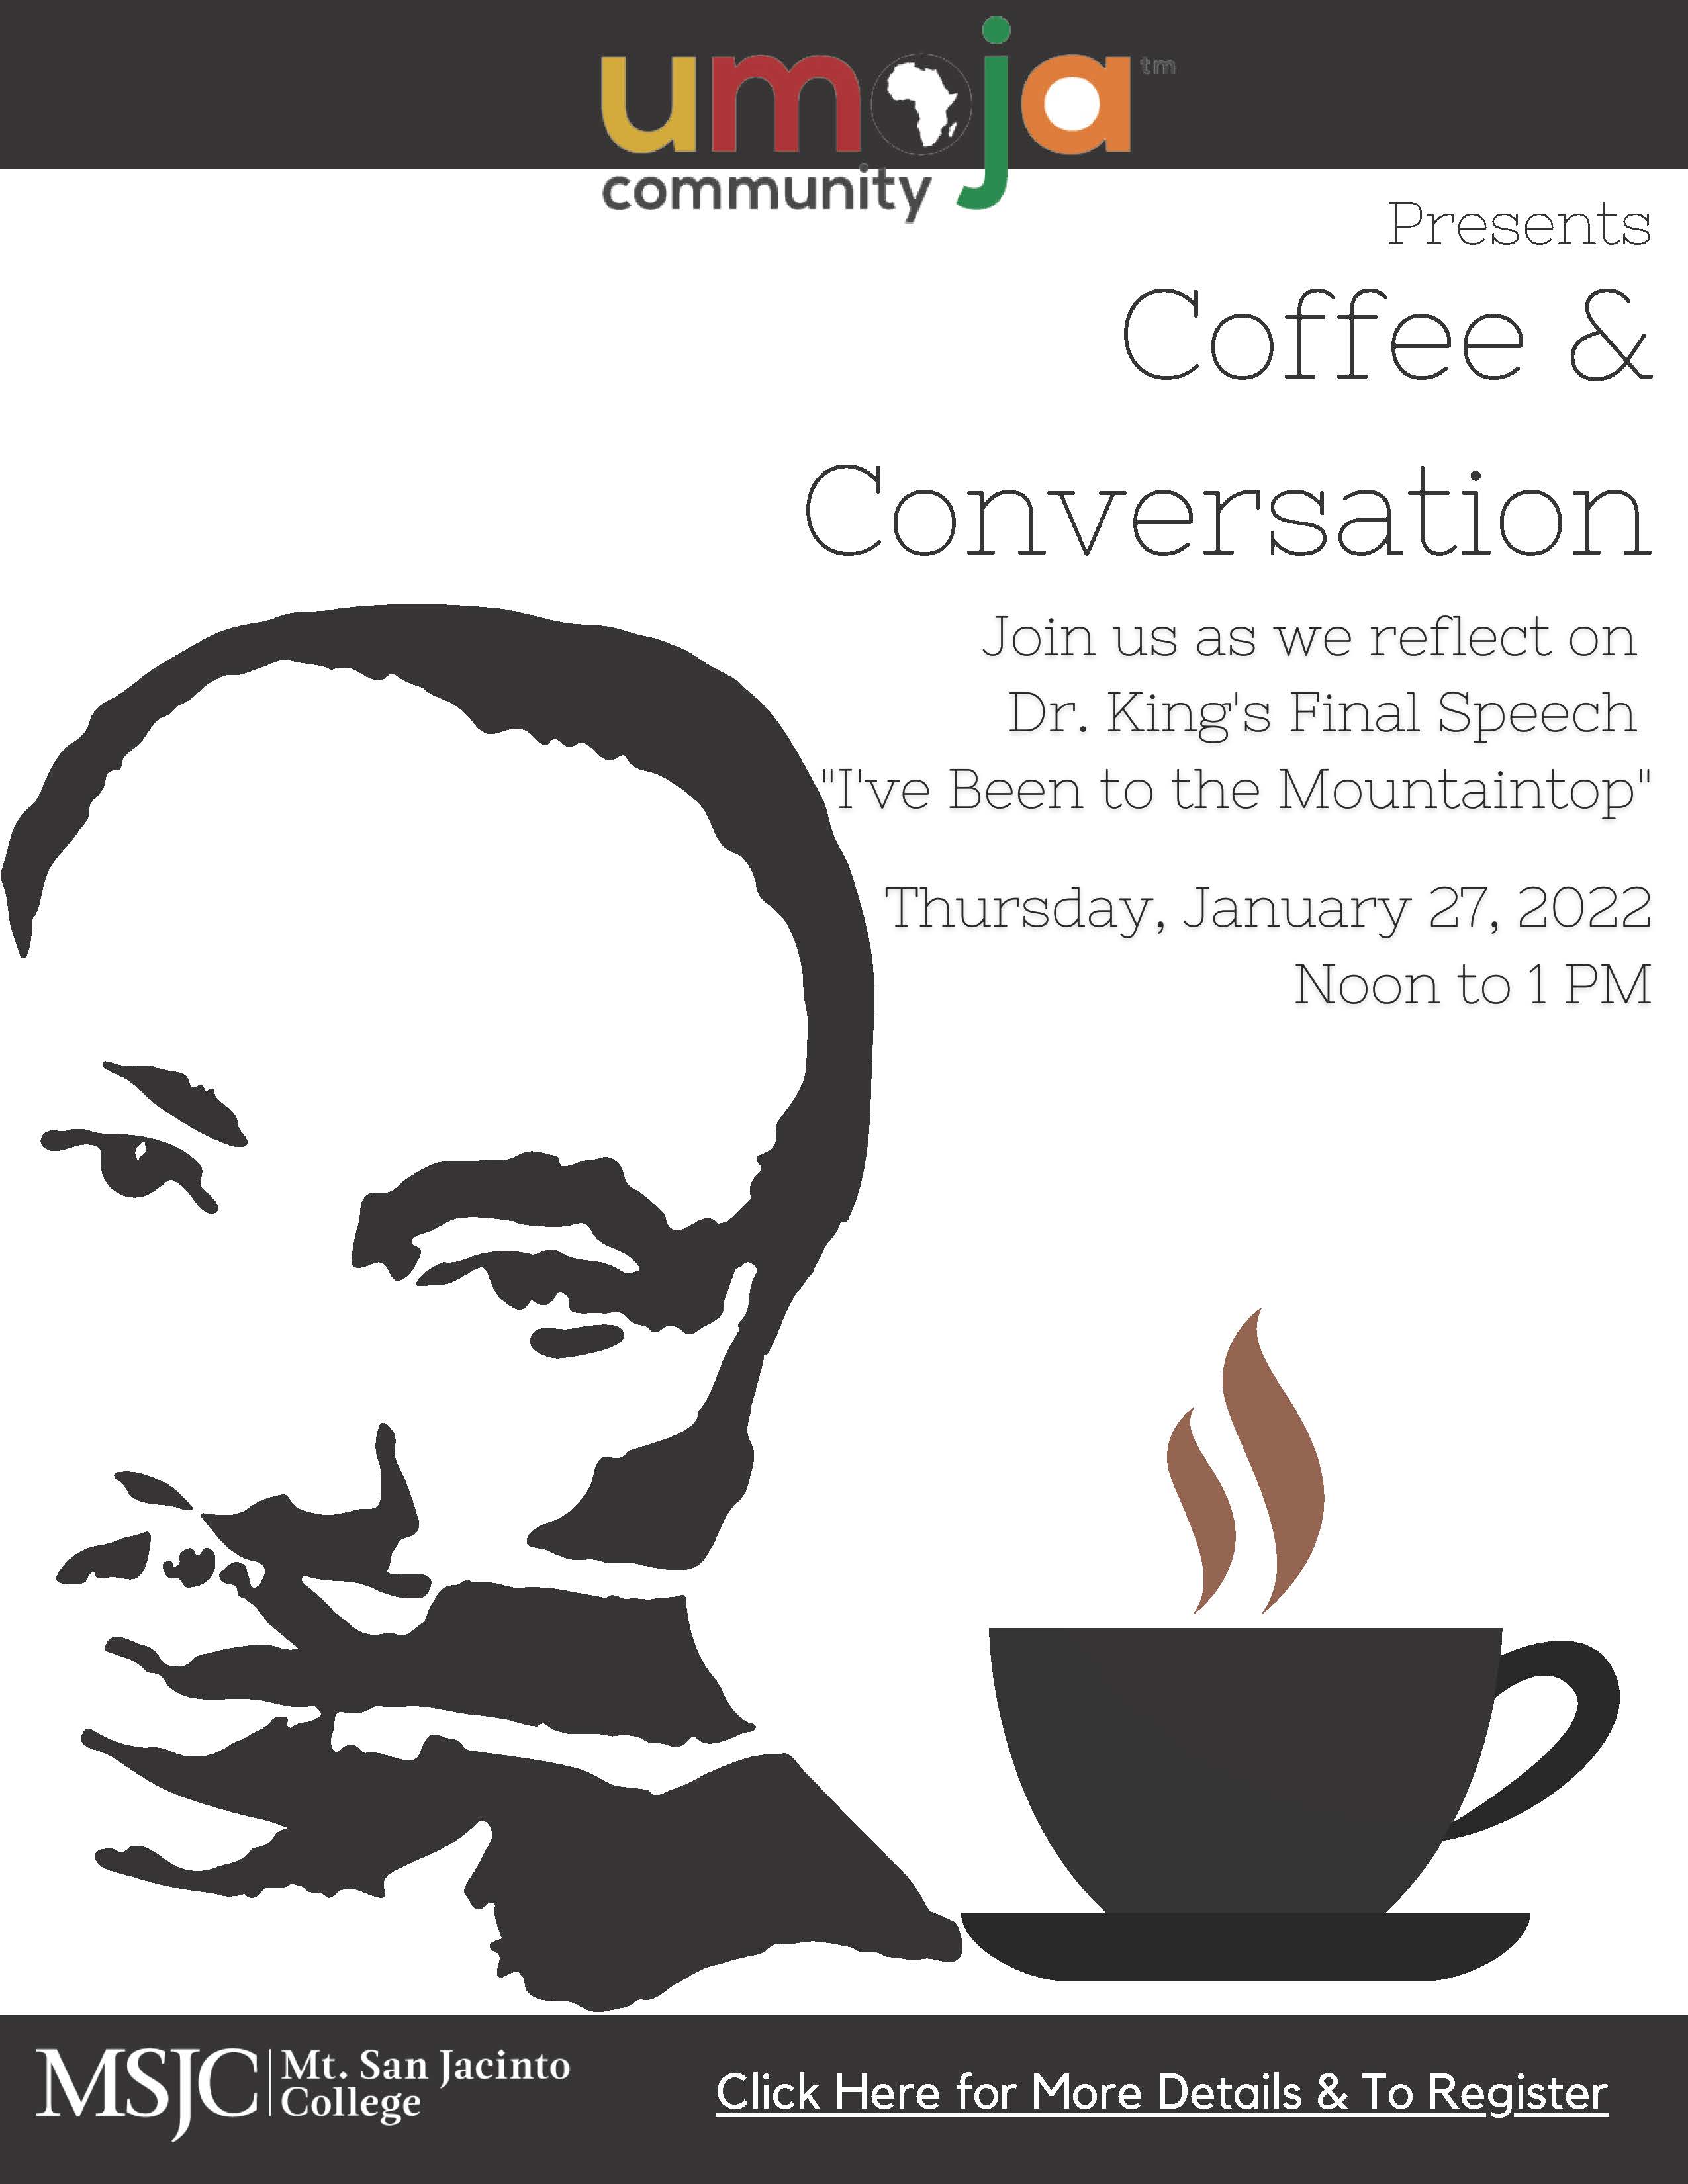 Join us as we reflect on Dr. King's final speech